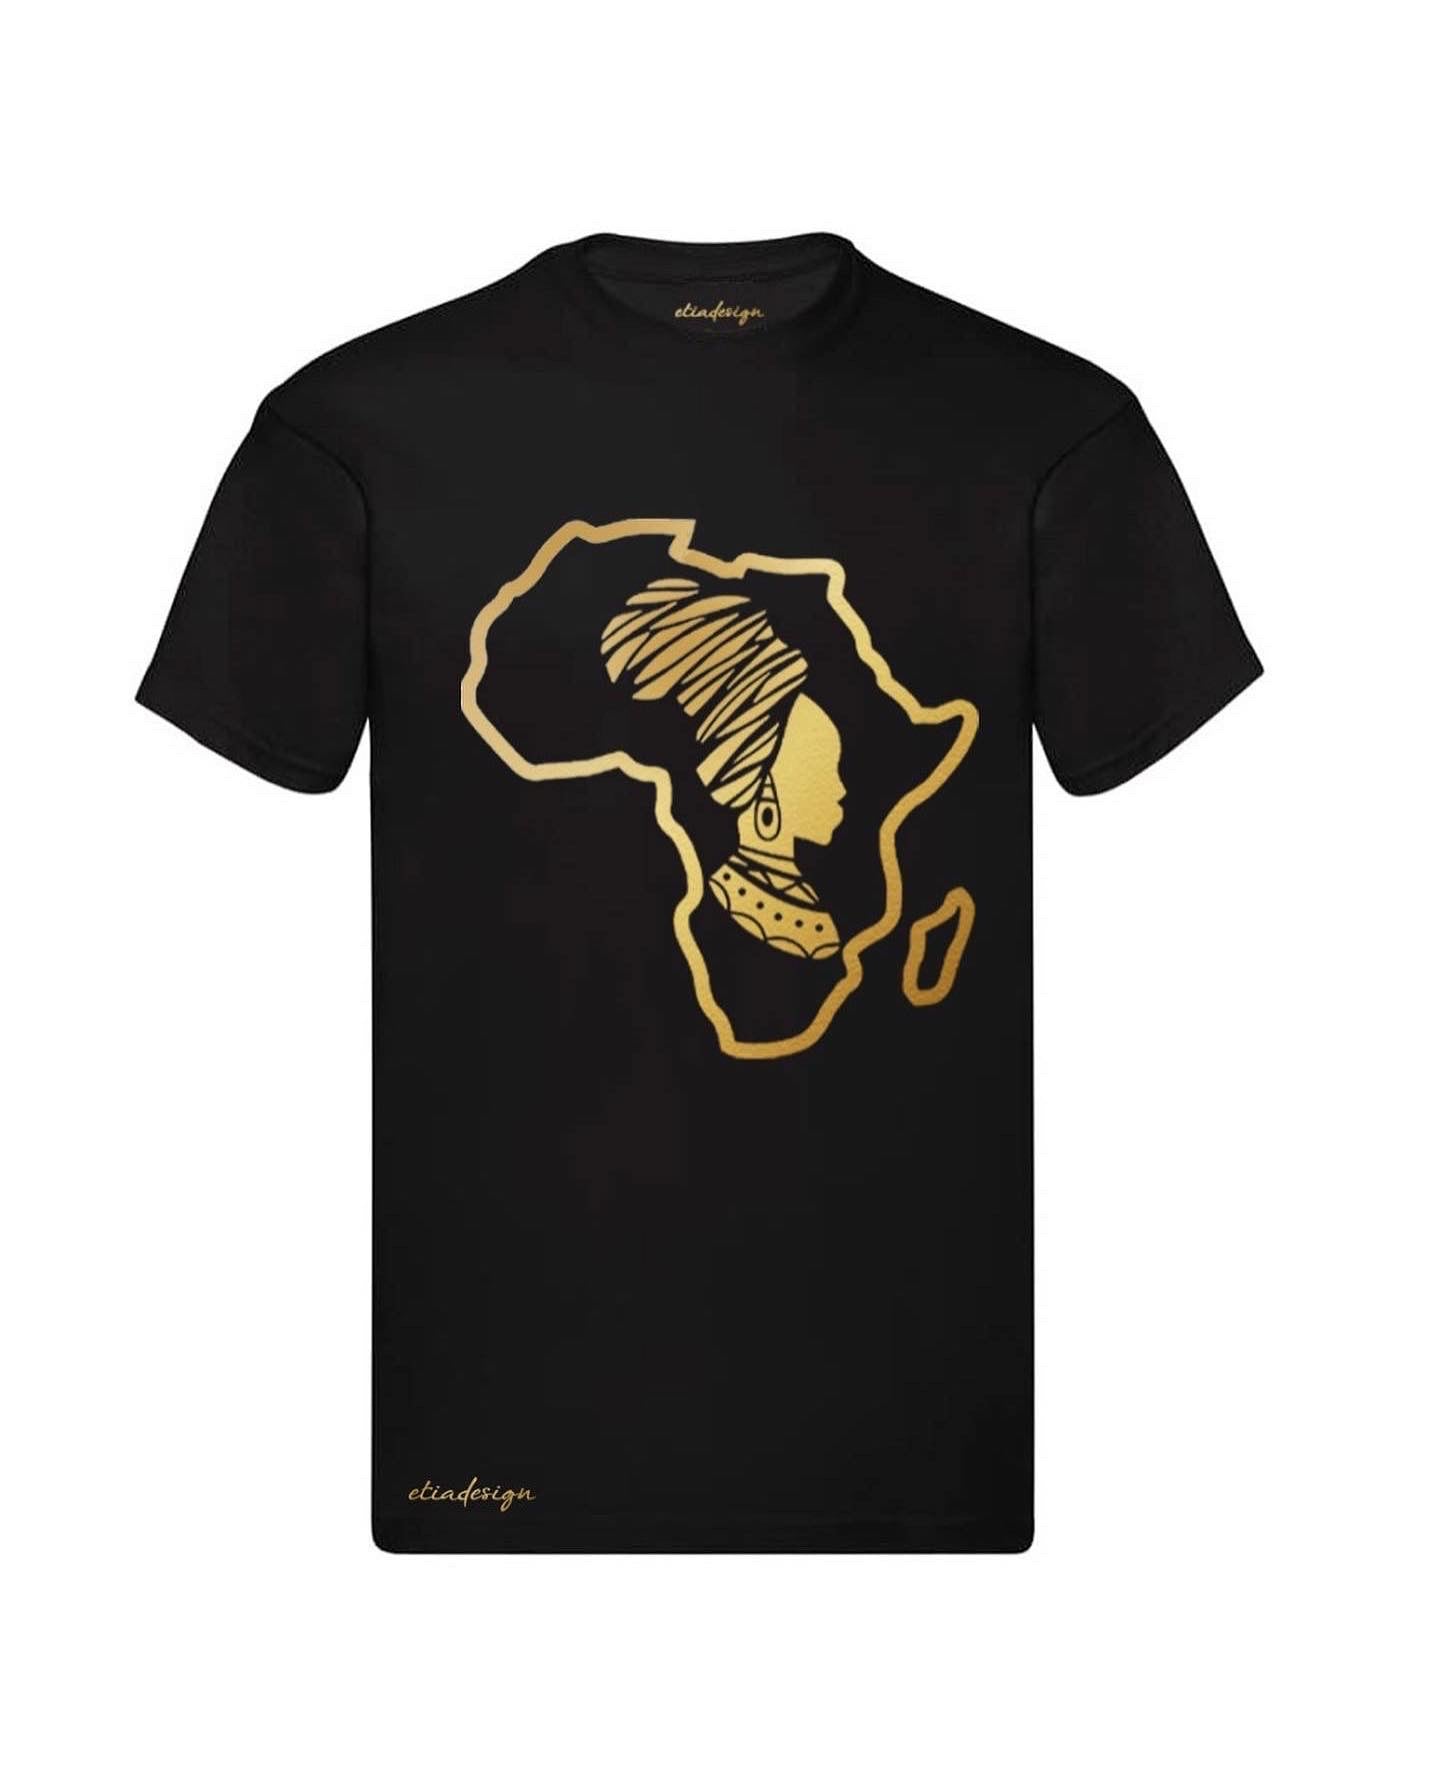 Mama Africa Design on soft Cotton wide fit T-shirt